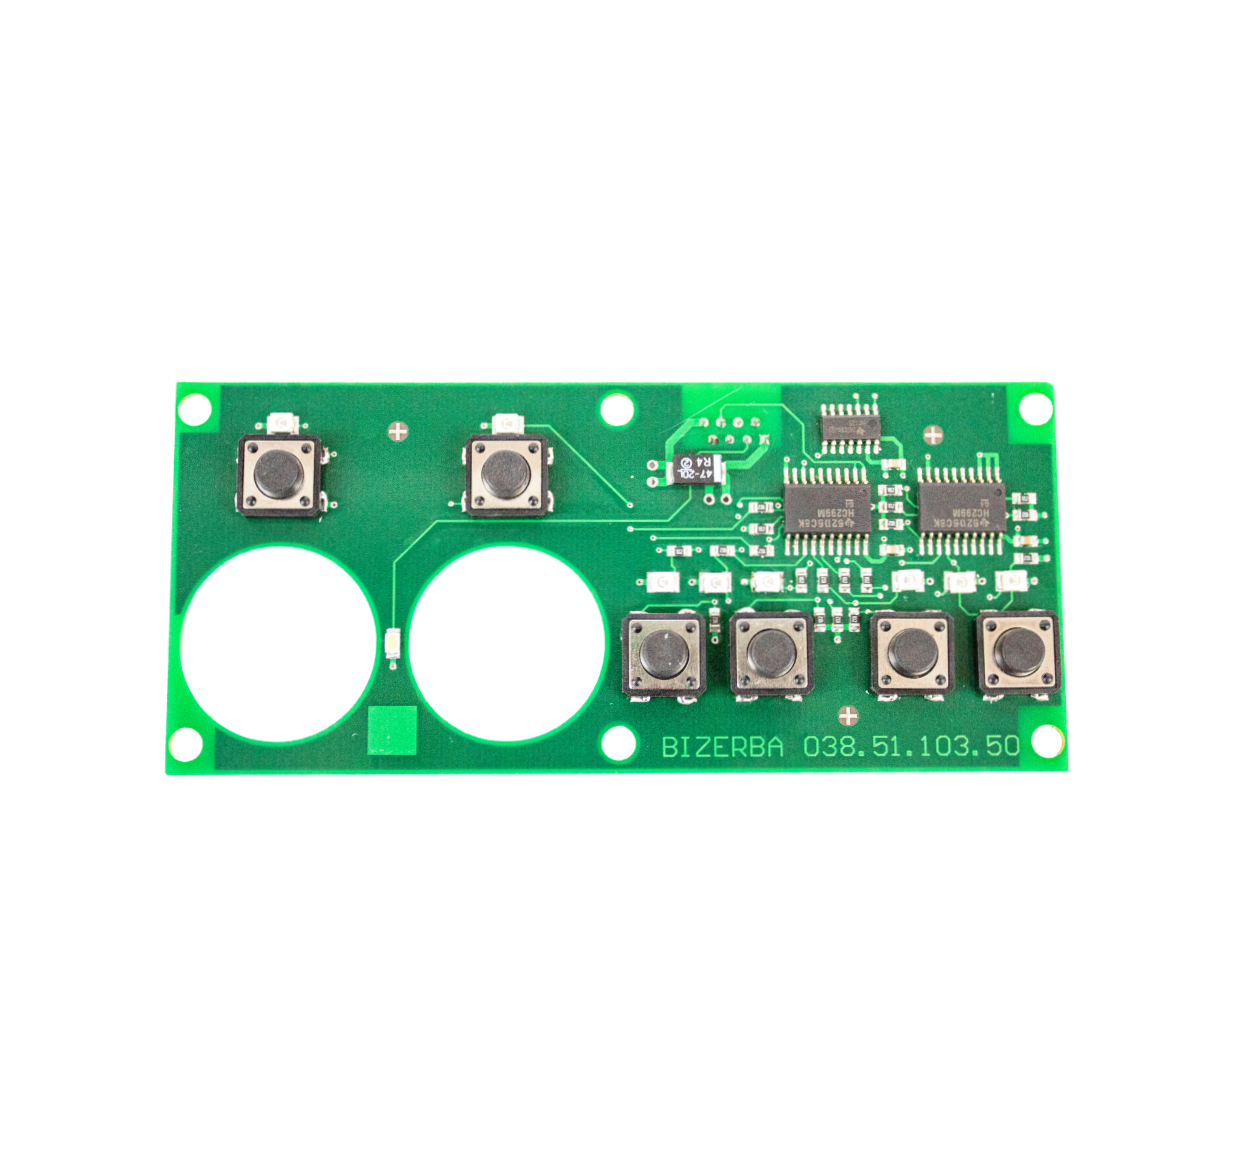 Board Display with Switch Compatible with Bizerba Slicers. Replaces 60385110150 top view